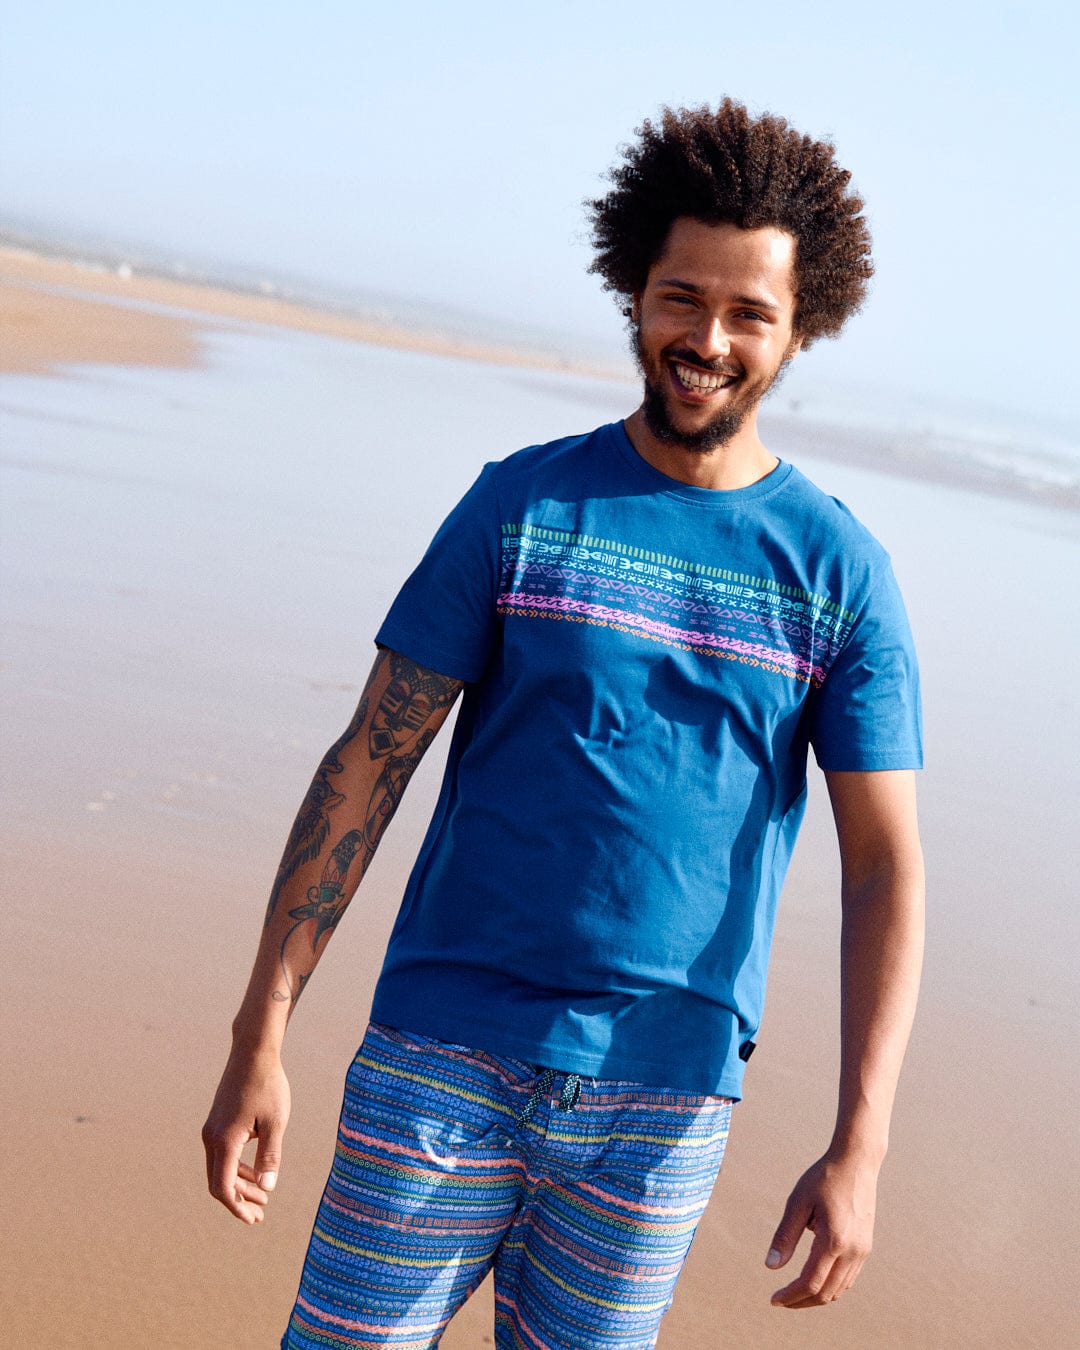 A young man with curly hair smiling, wearing a Marks Chest - Mens Short Sleeve T-Shirt in Blue from Saltrock, and patterned shorts, walking on a sandy beach.